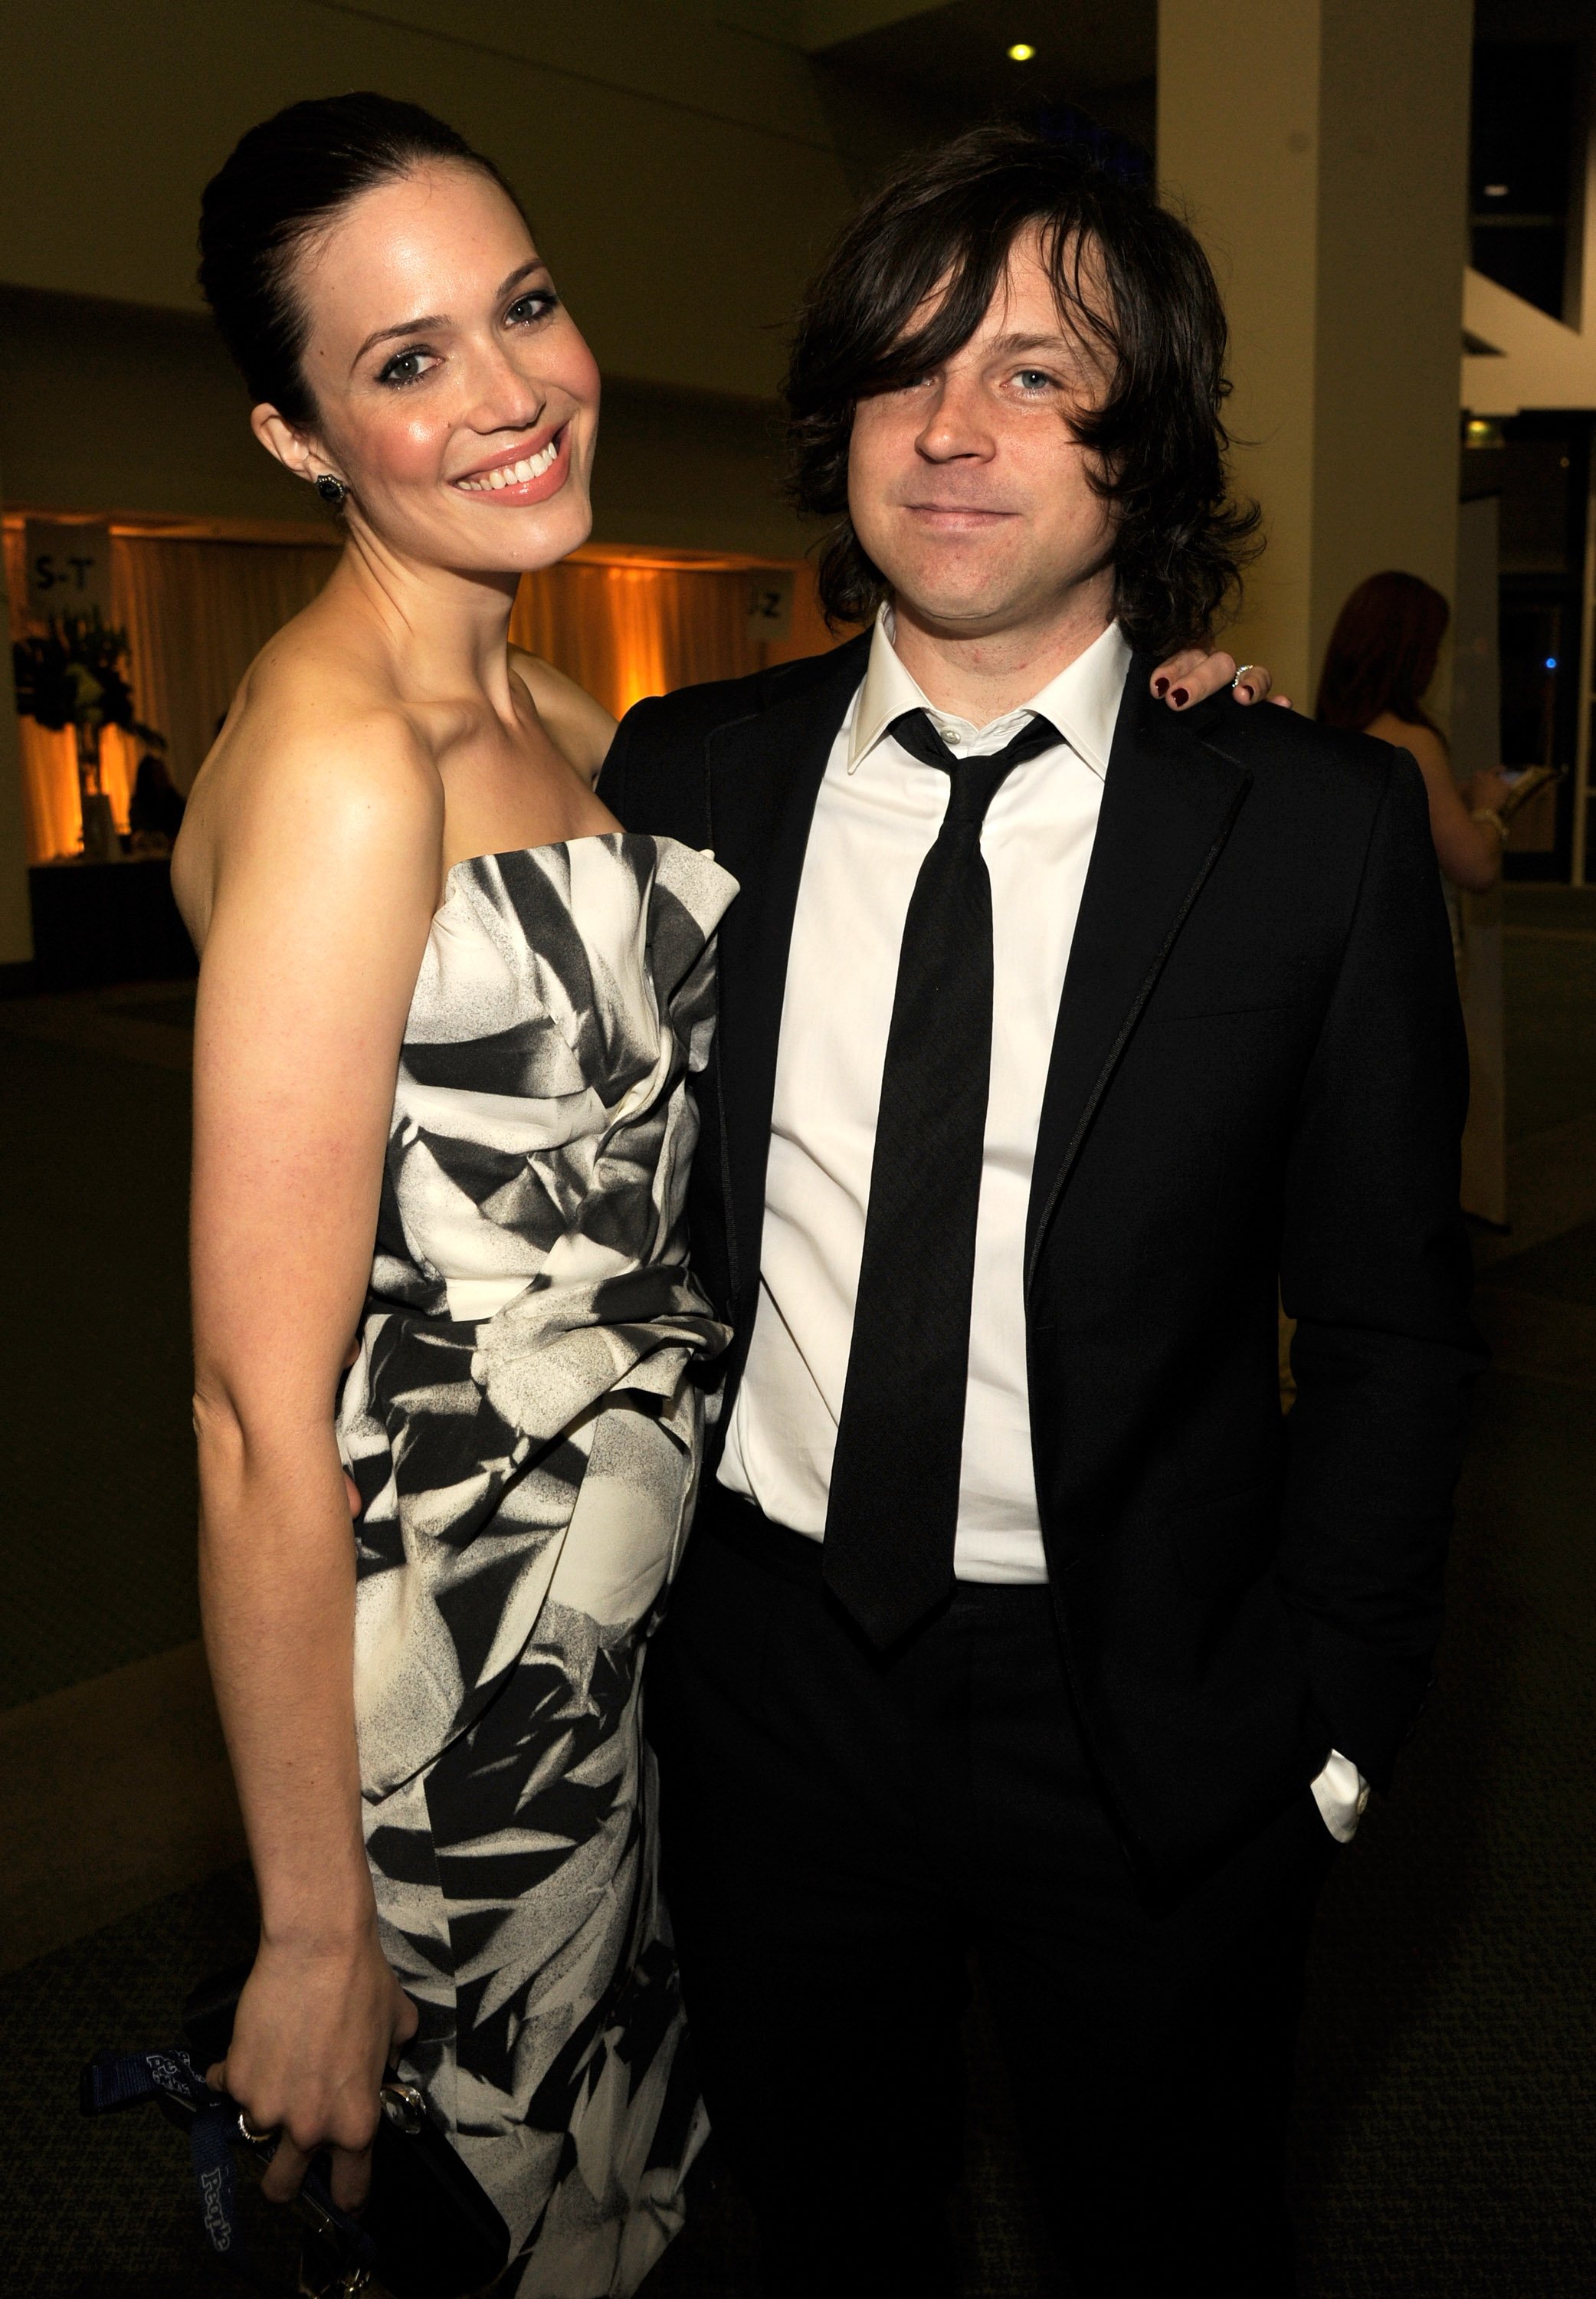 Mandy Moore and Ryan Adams attend The 2012 MusiCares Person Of The Year Gala Honoring Paul McCartney at Los Angeles Convention Center on February 10, 2012 in Los Angeles, California | Source: Getty Images